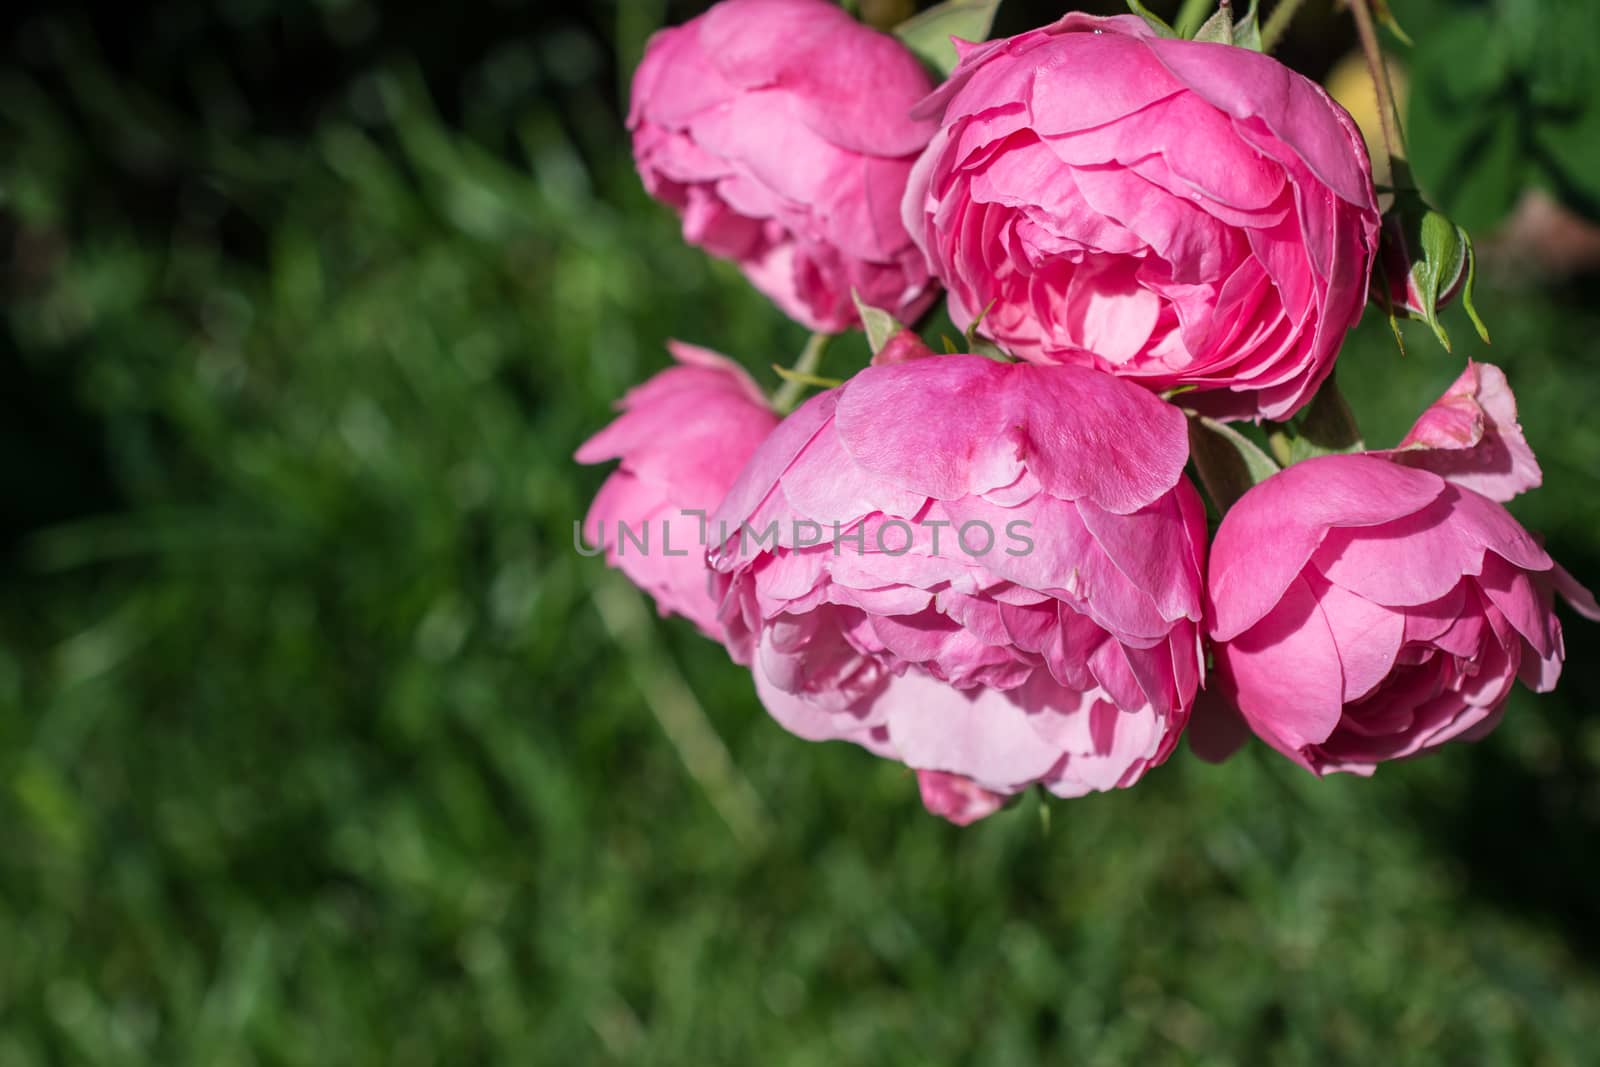 Blooming beautiful colorful roses in the garden by berkay